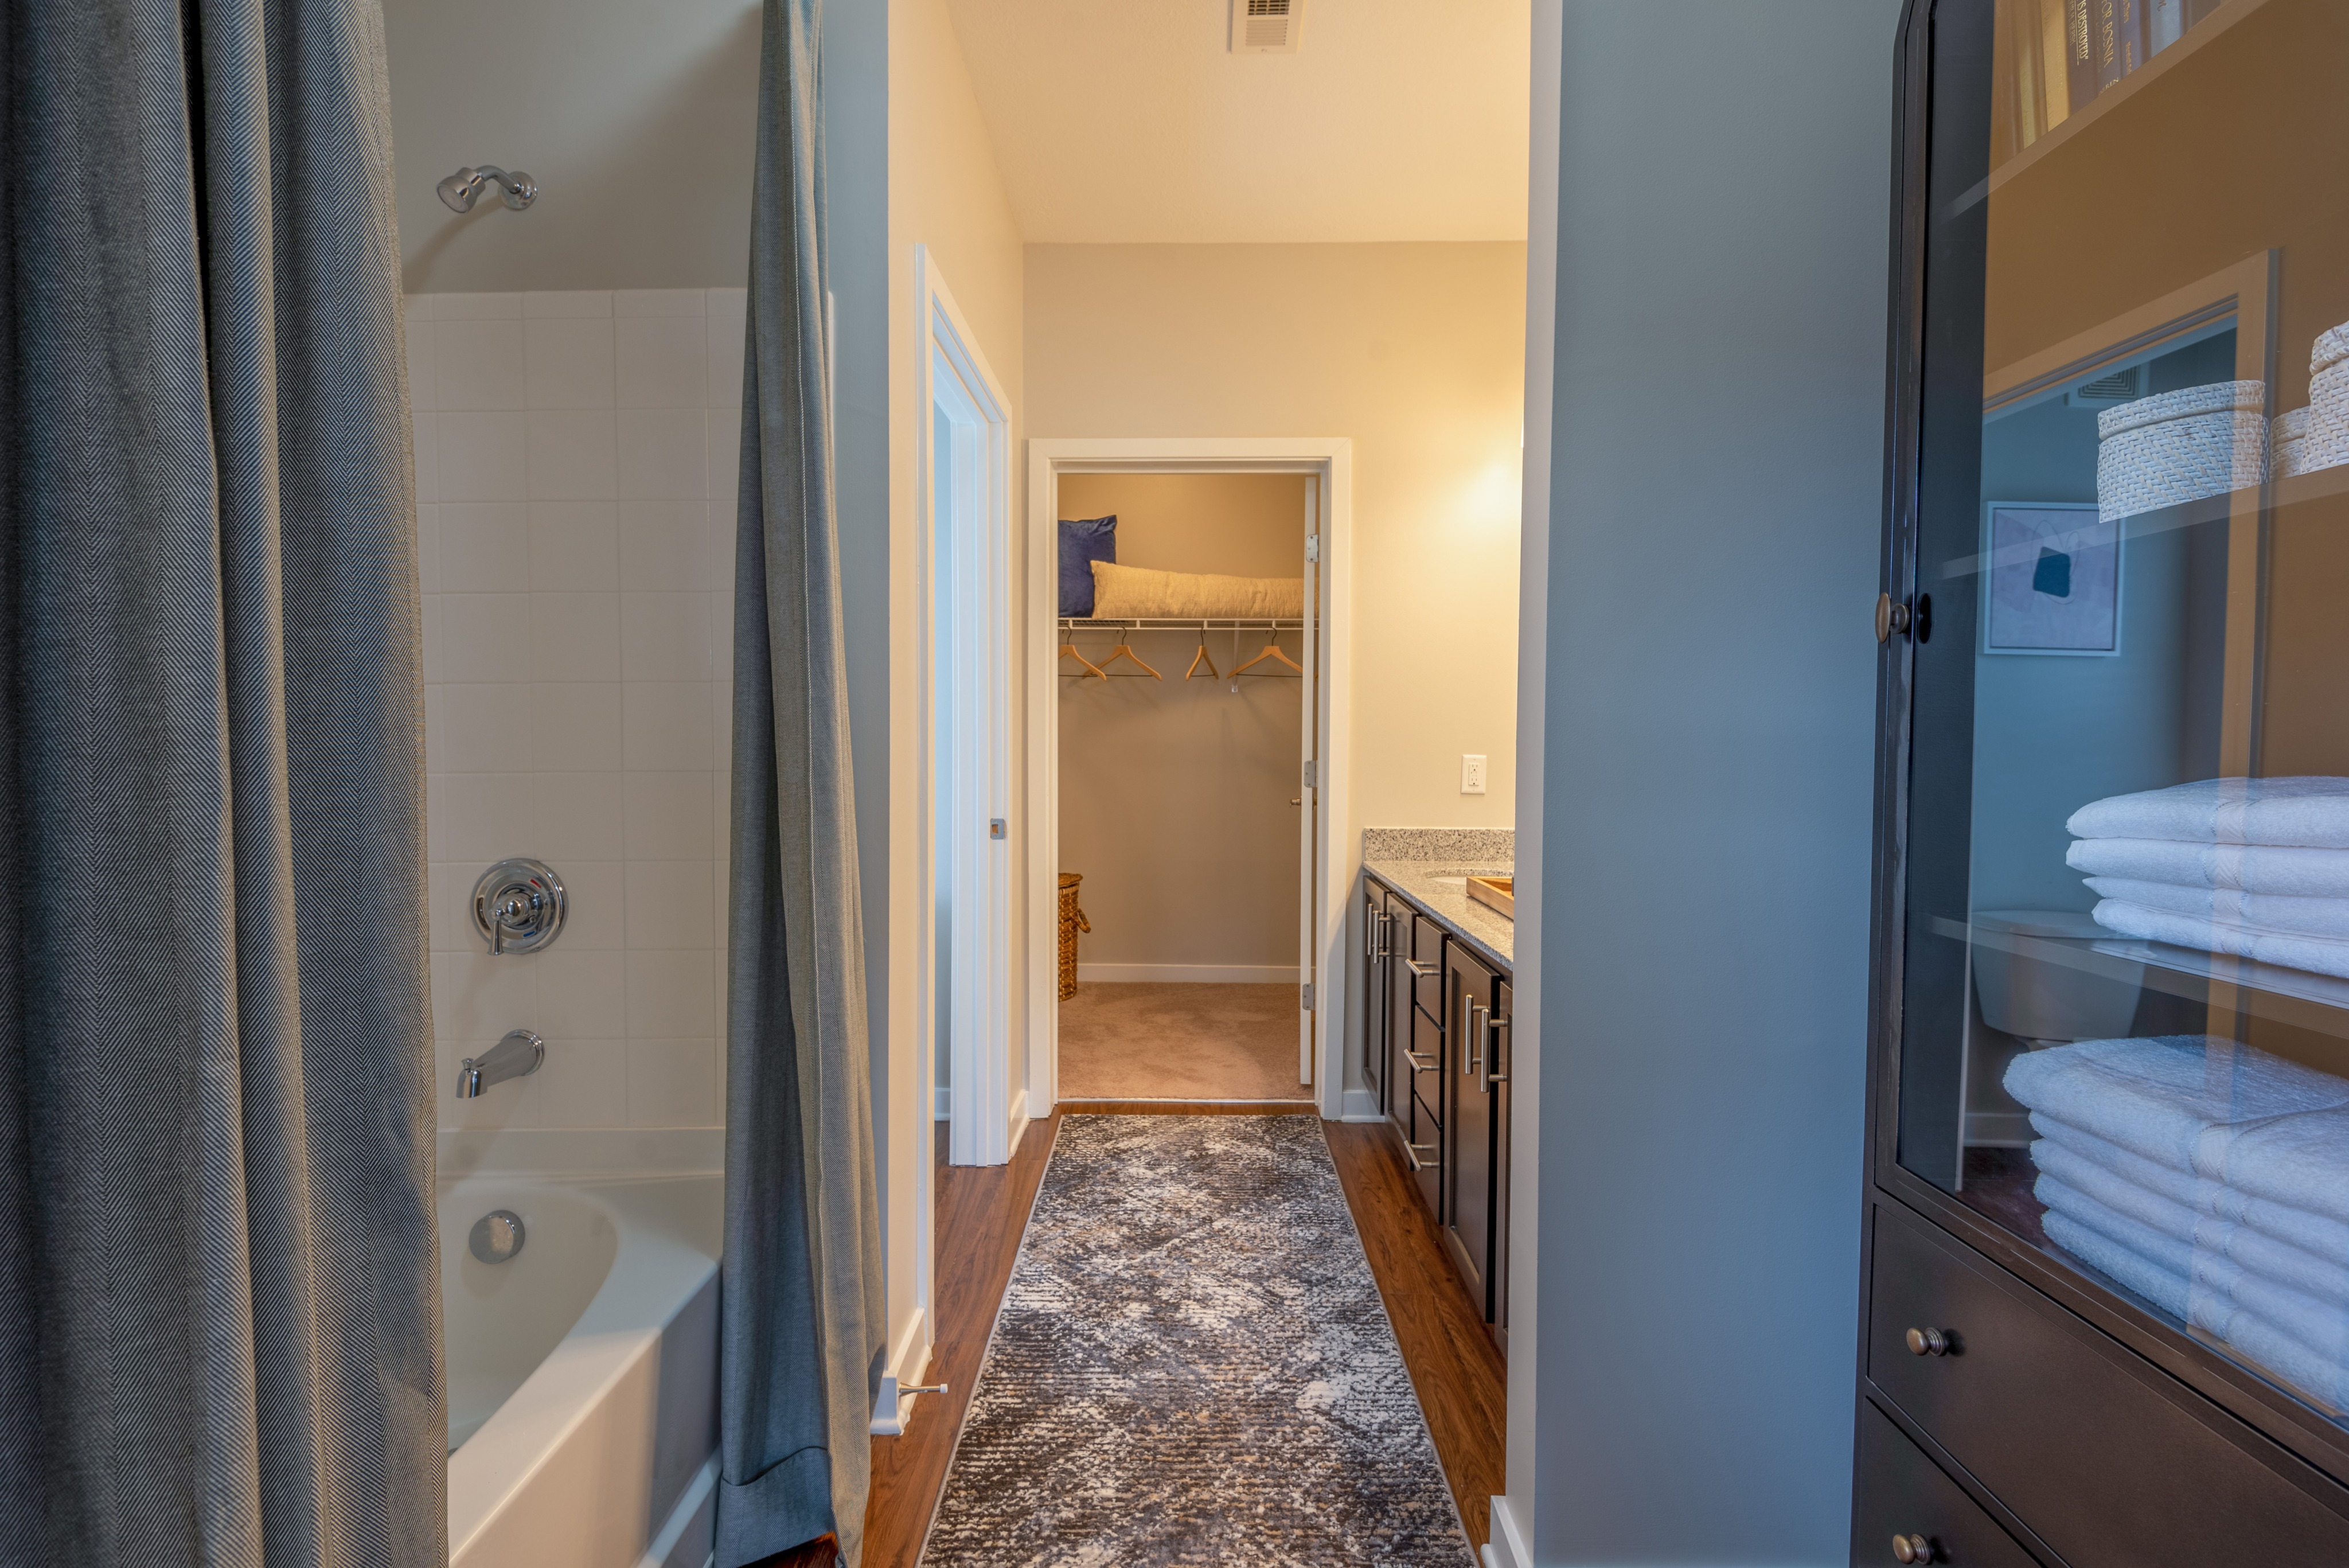 Furnished model master bathroom with access to walk in closet